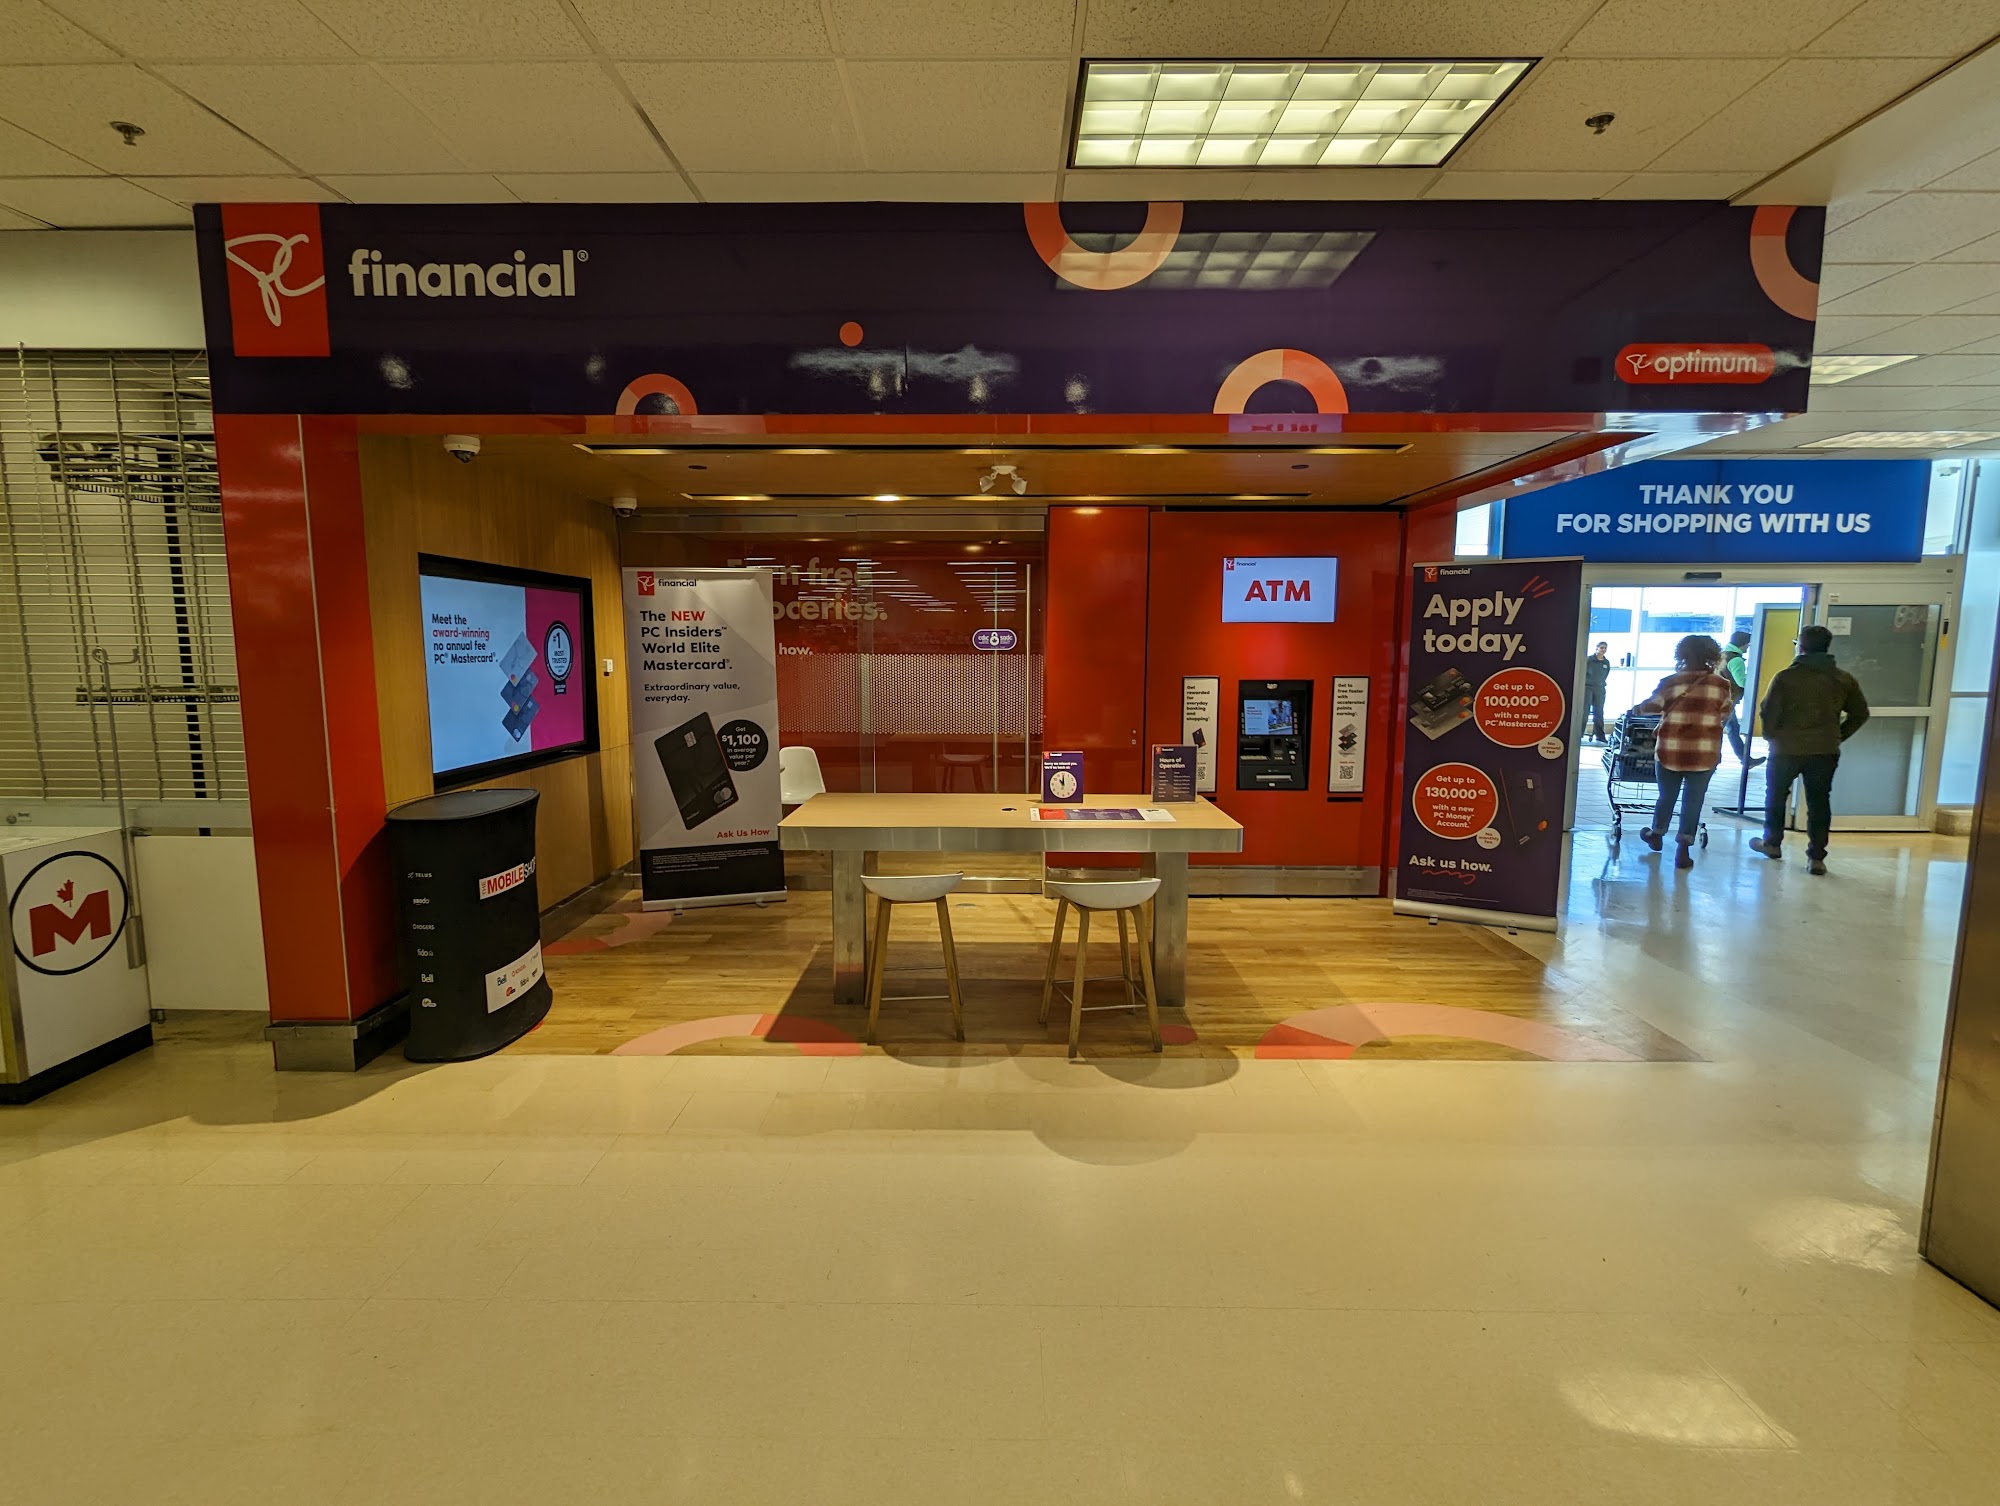 President's Choice Financial Pavilion and ATM